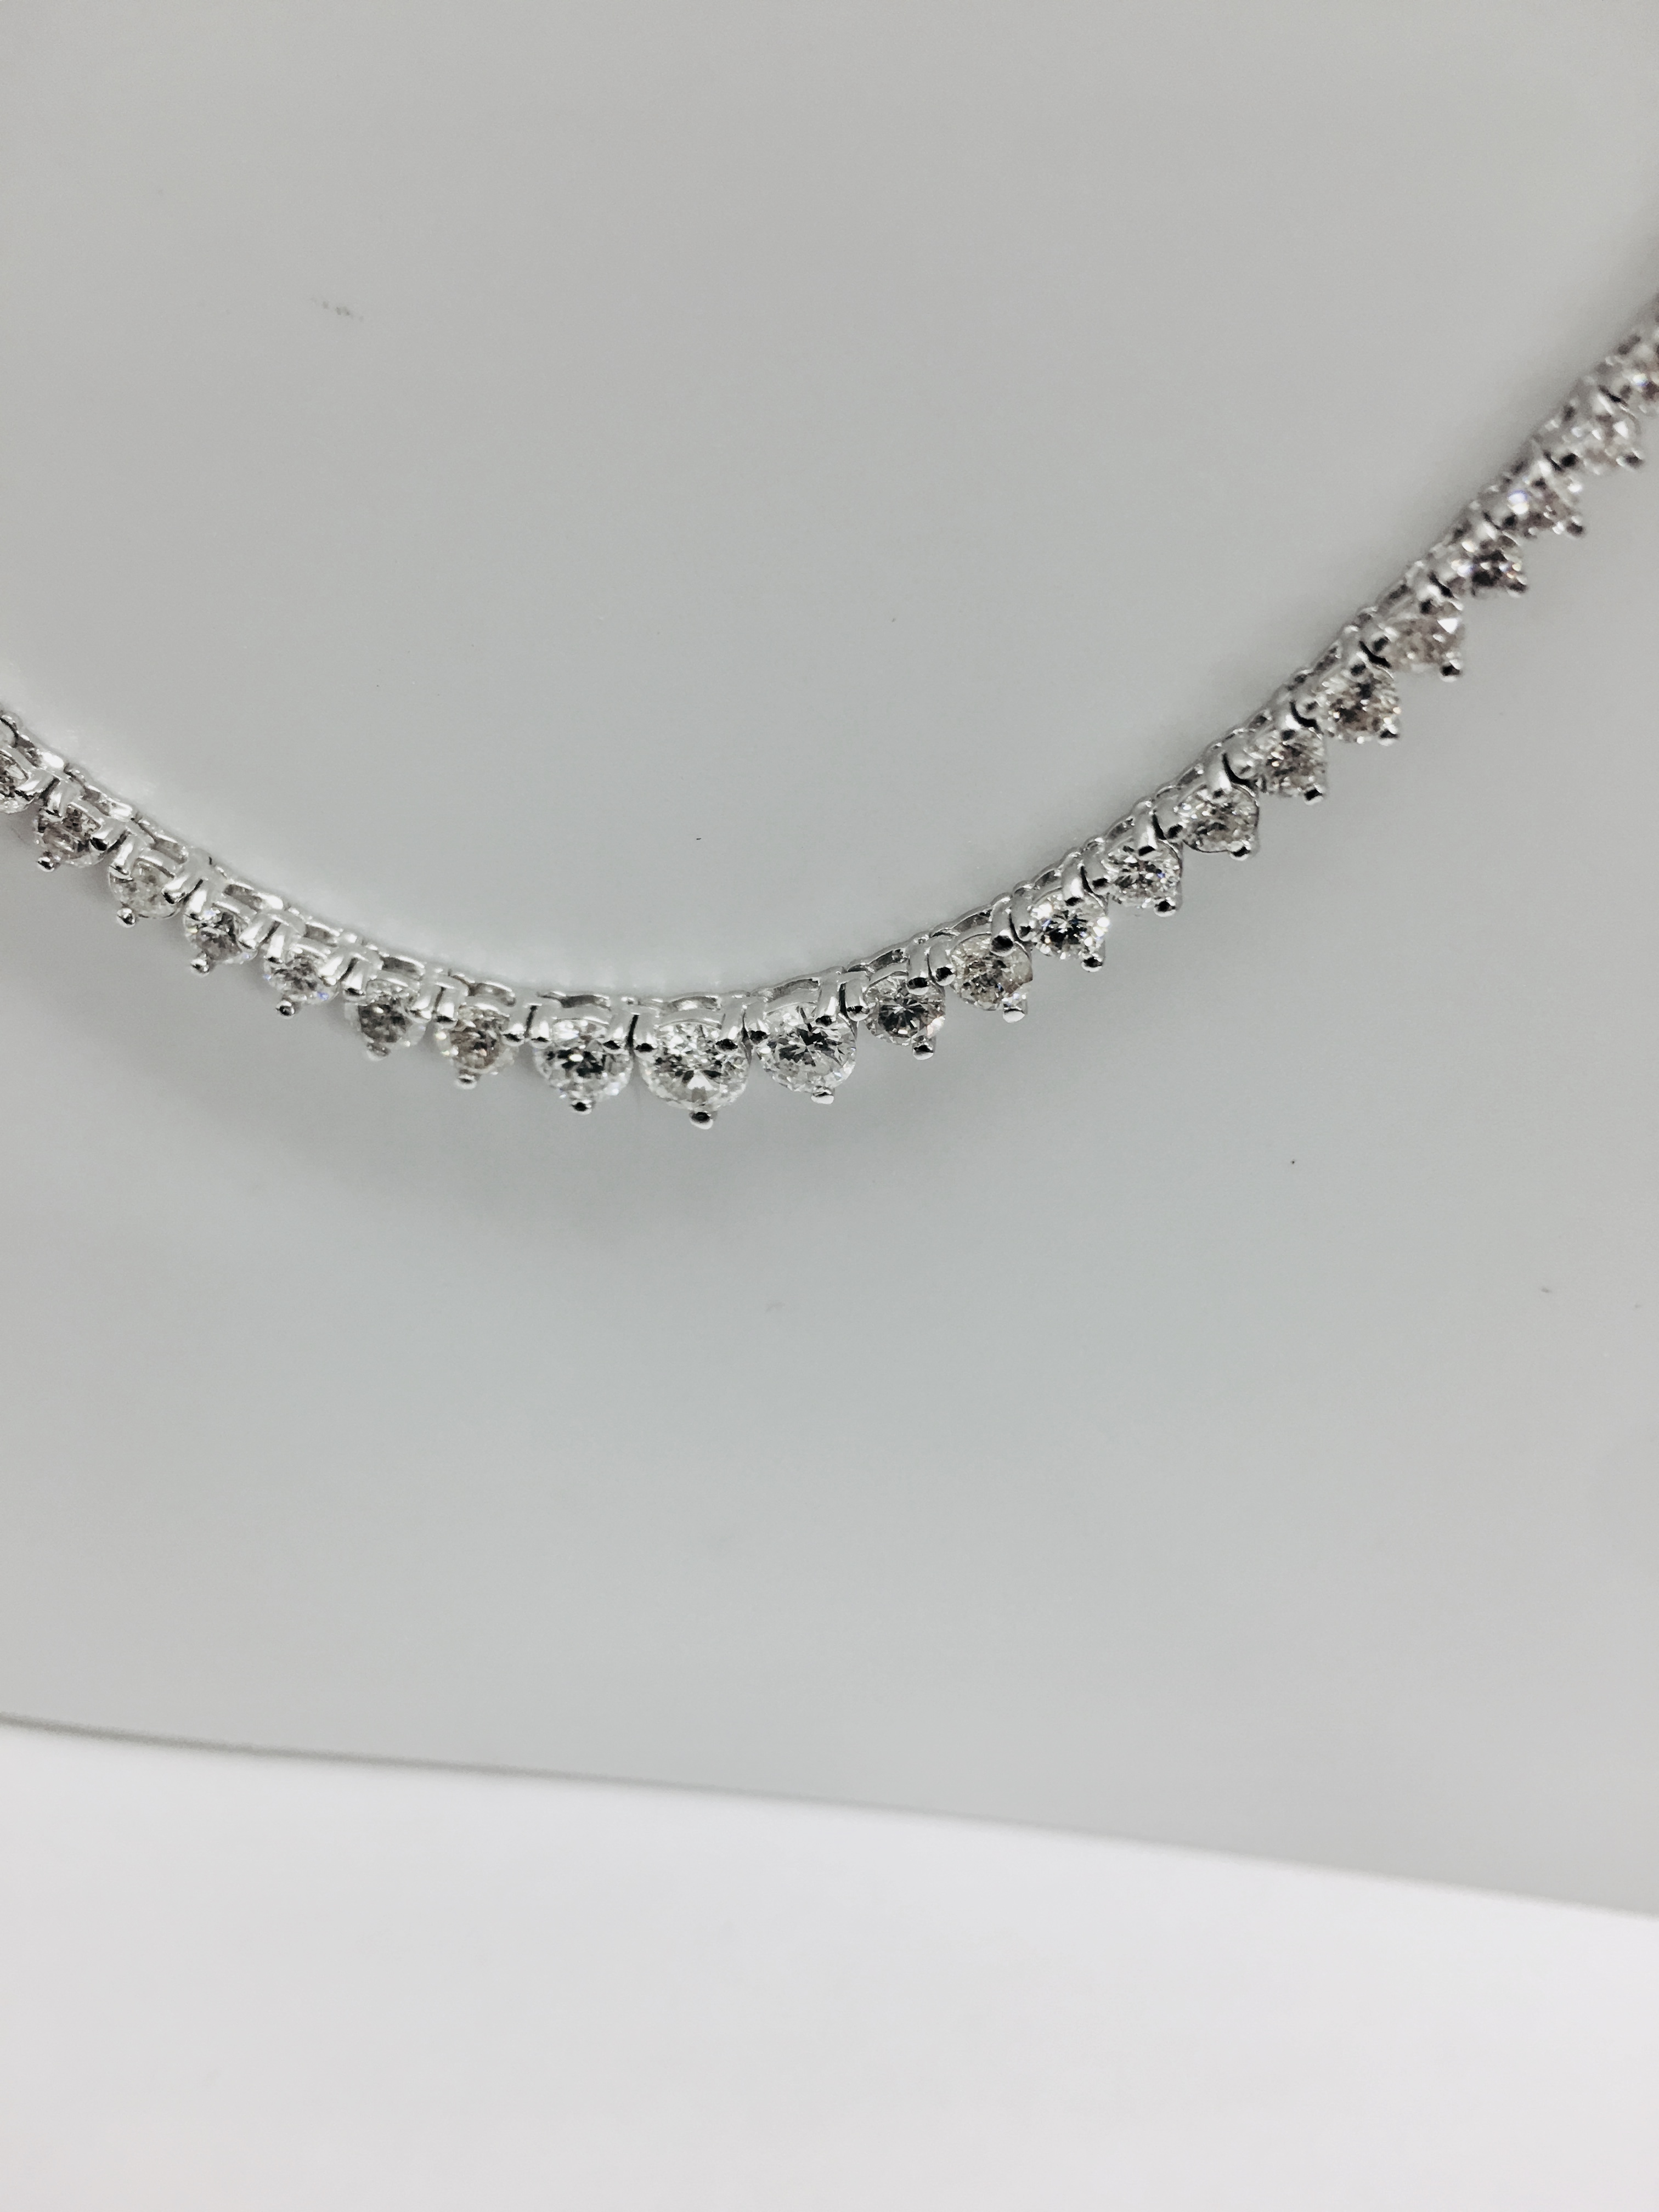 11.75ct Diamond tennis style necklace. 3 claw setting. Graduated diamonds, I colour, Si2 clarity - Image 6 of 6